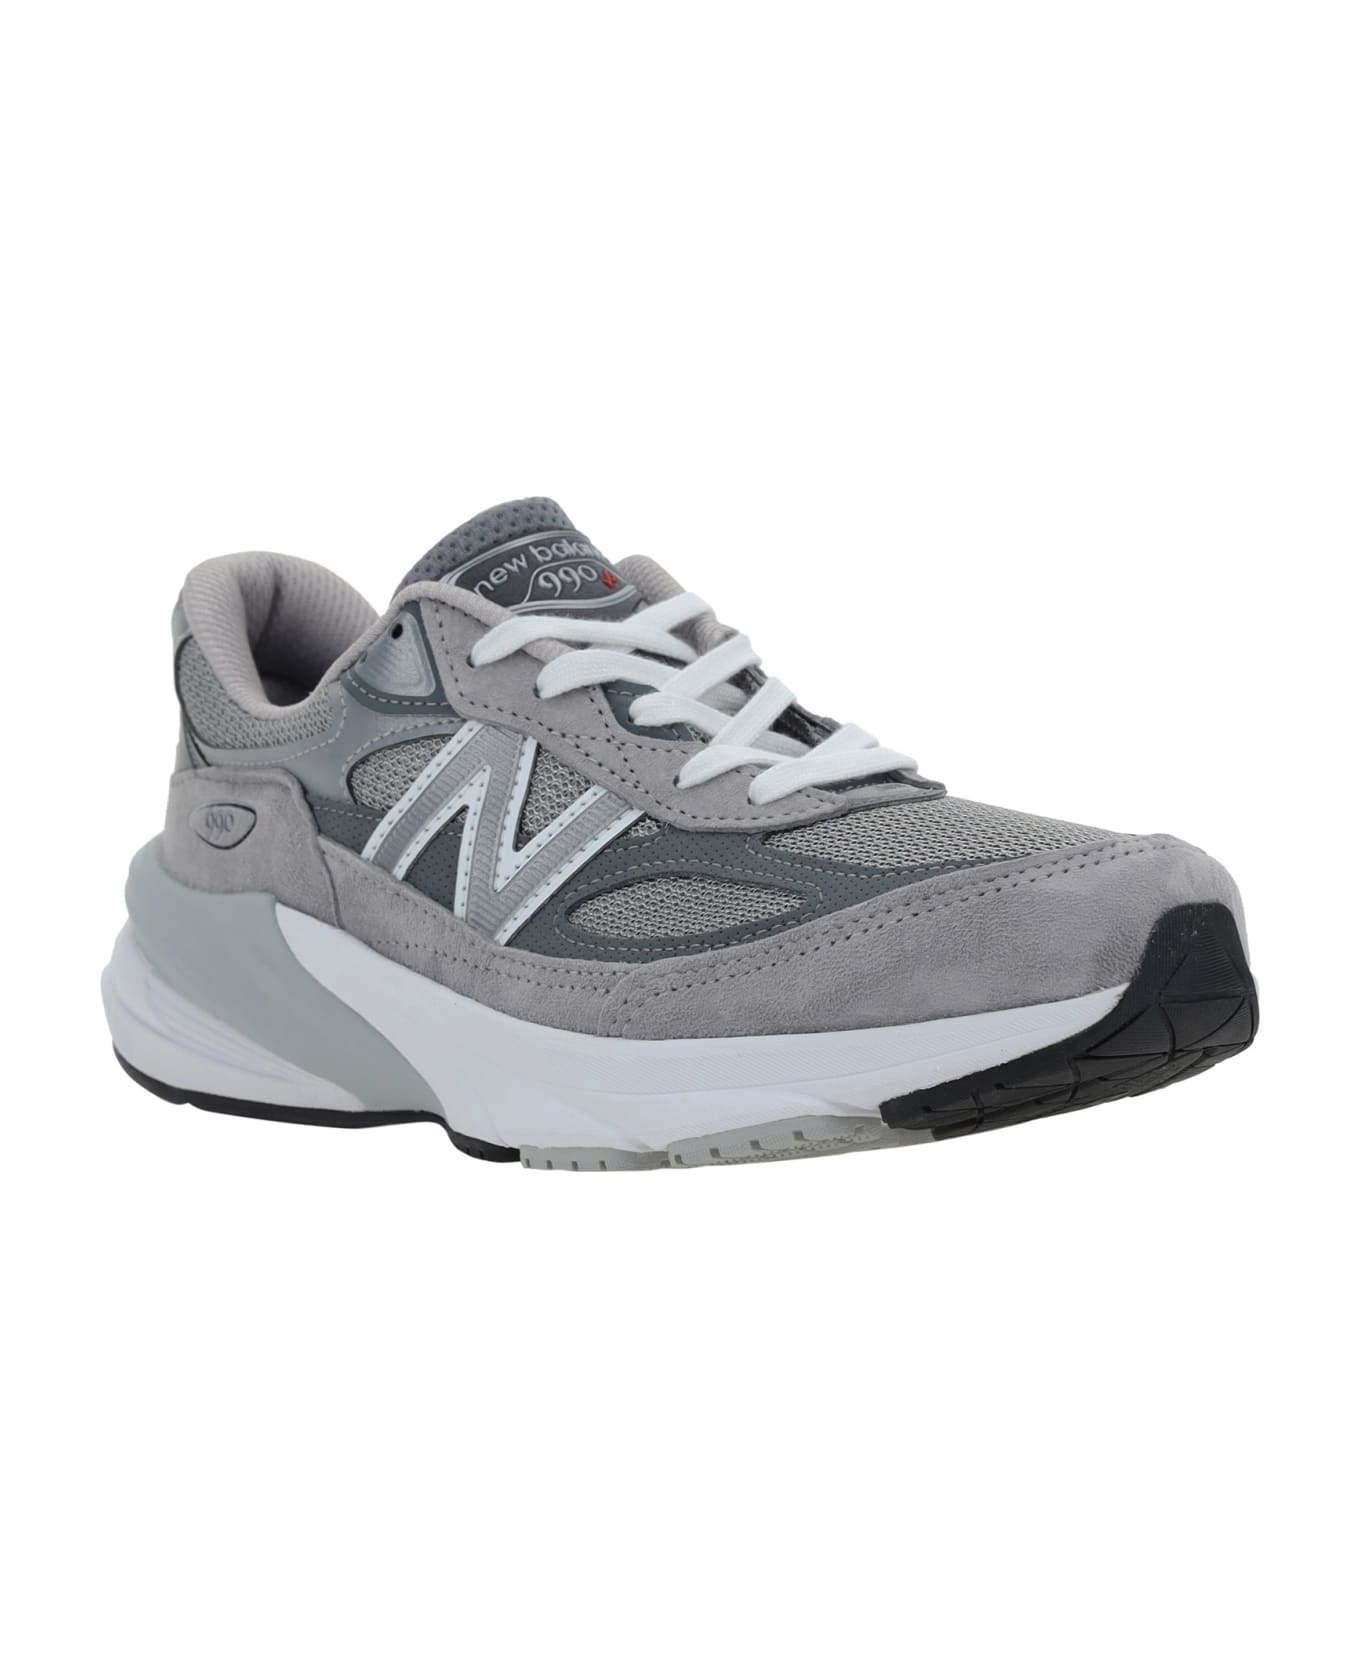 New Balance Lifestyle Sneakers - Cool Grey